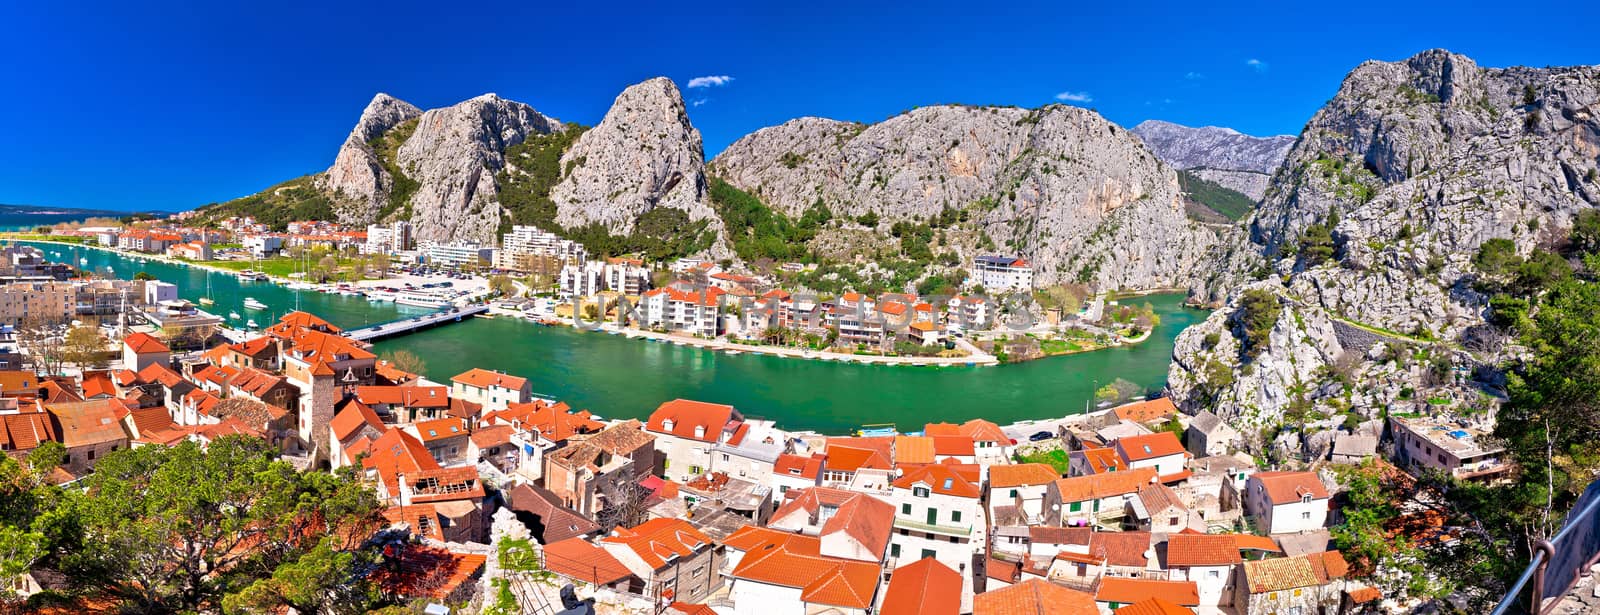 Town of Omis and Cetina river mouth panoramic view by xbrchx